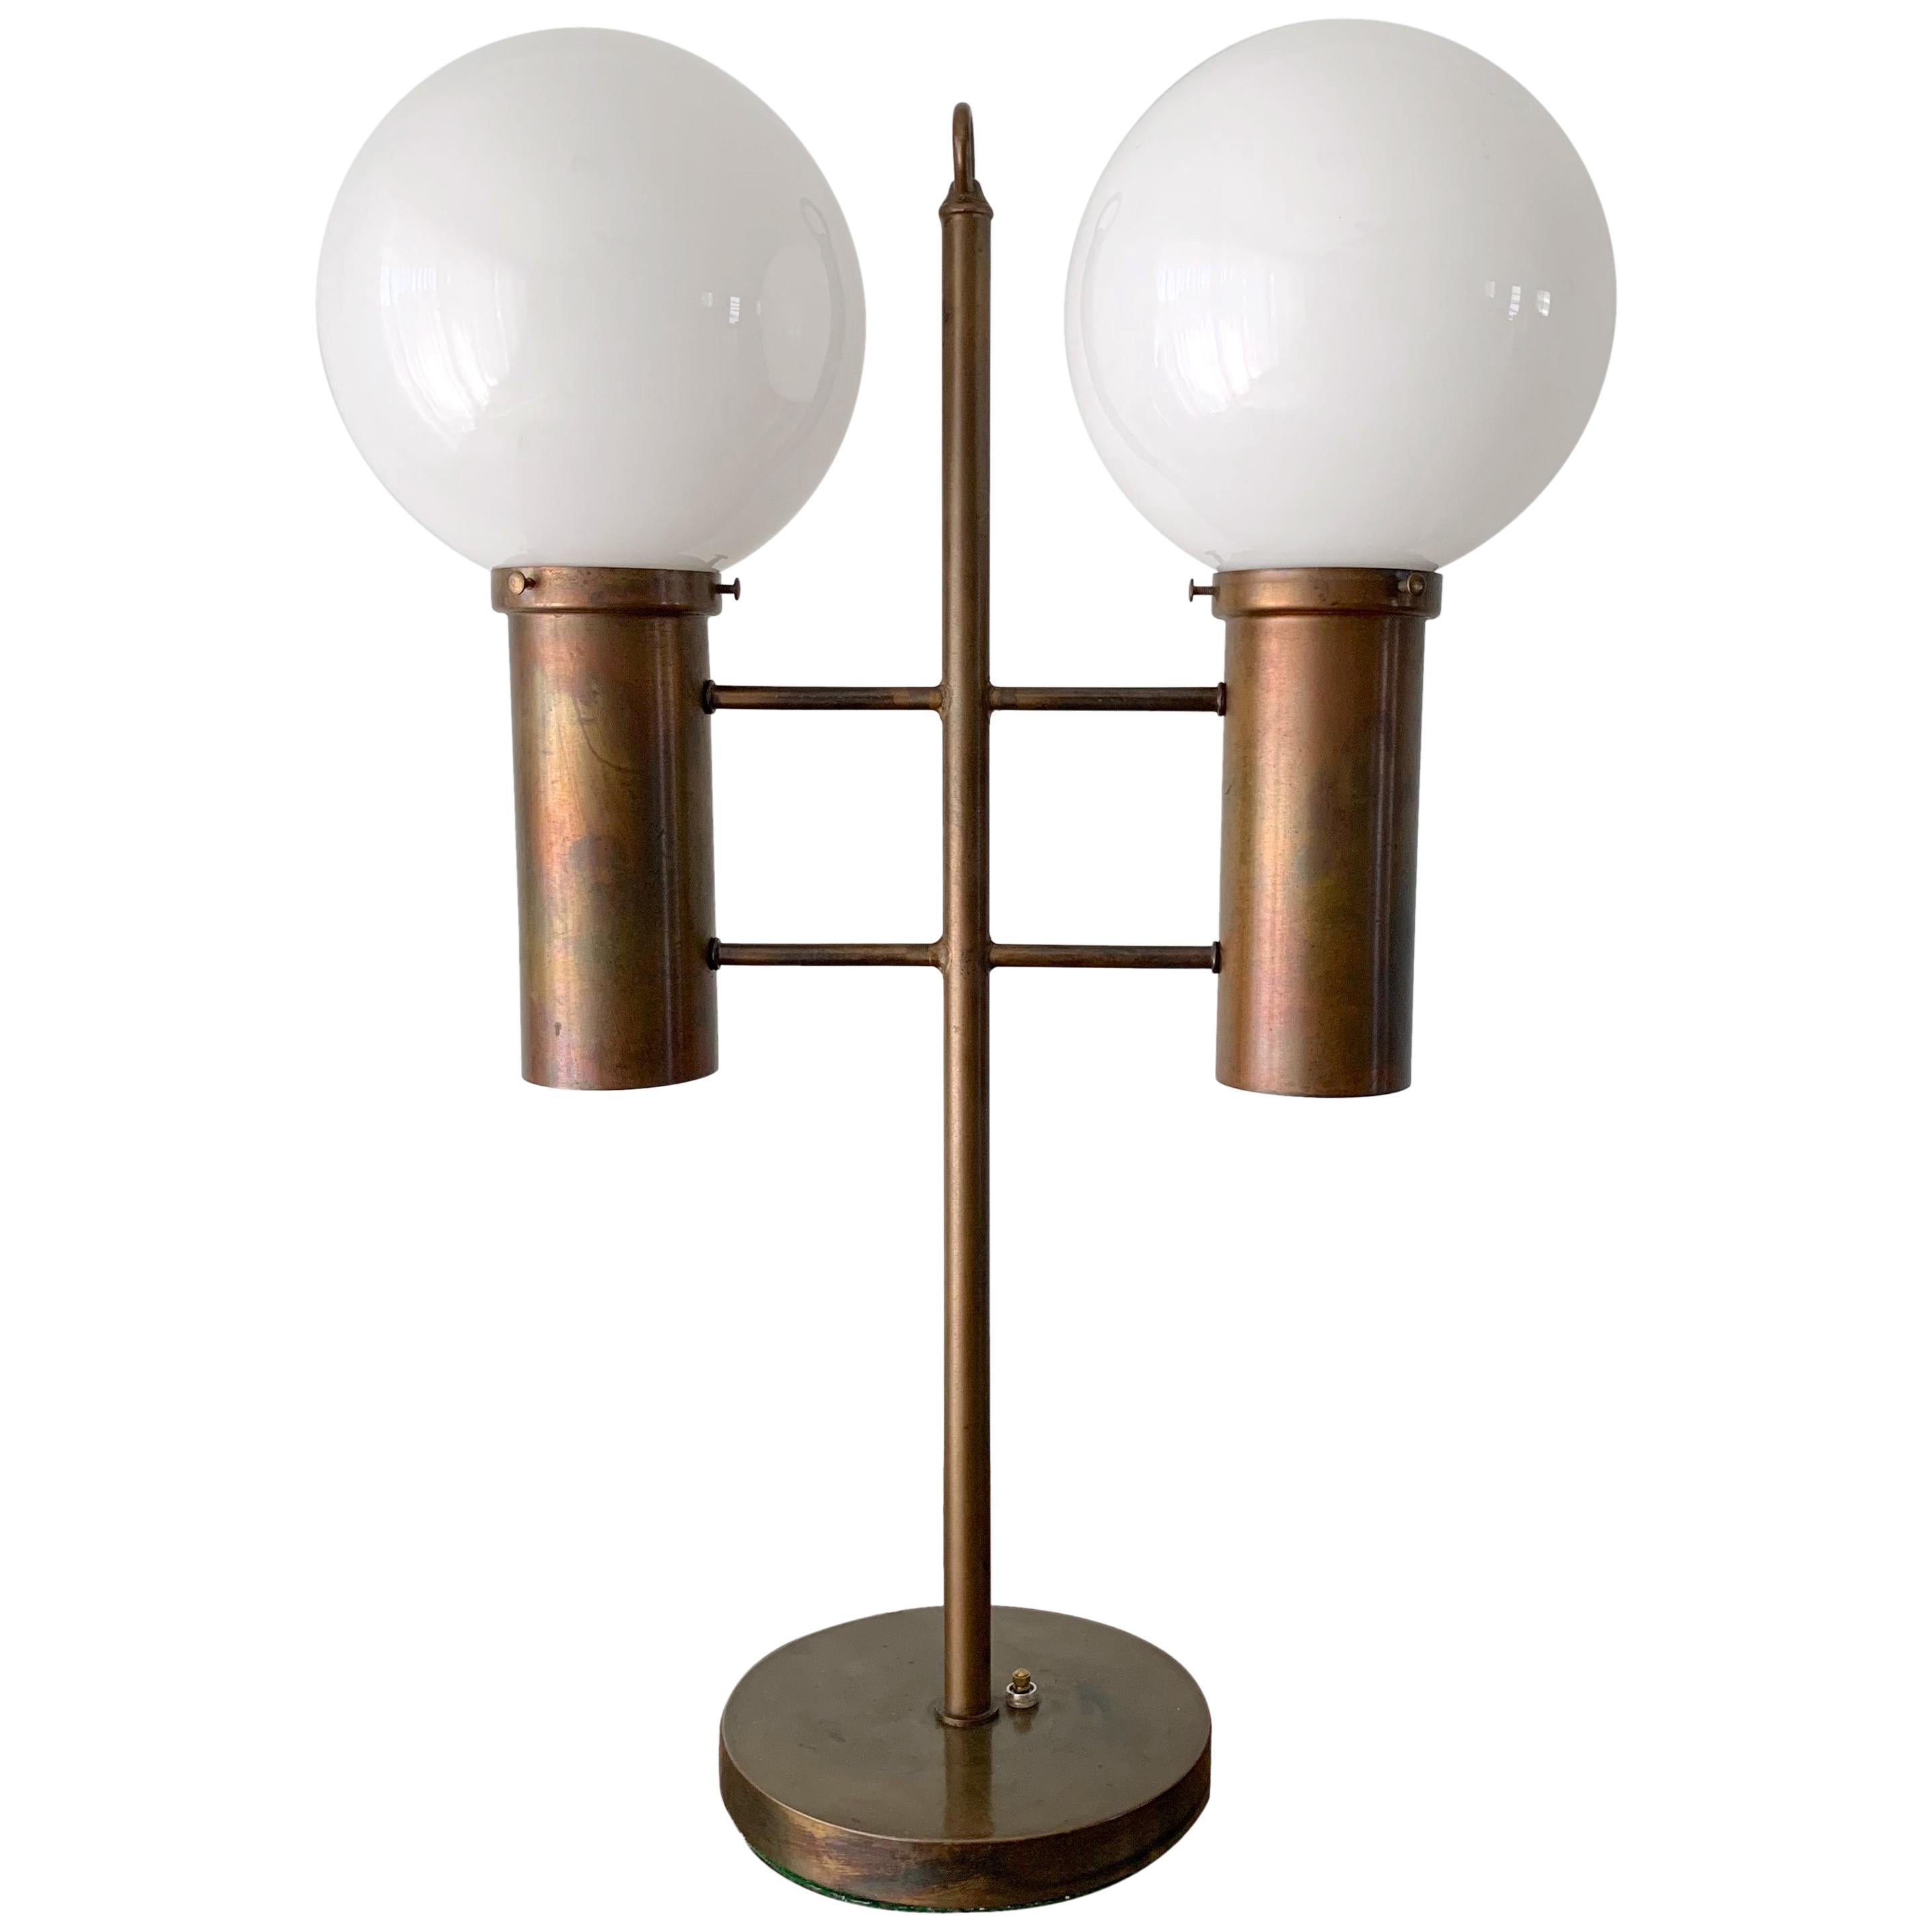 Robert Long Solid Brass and Opal Glass Lamp, Sausalito California, circa 1965 For Sale